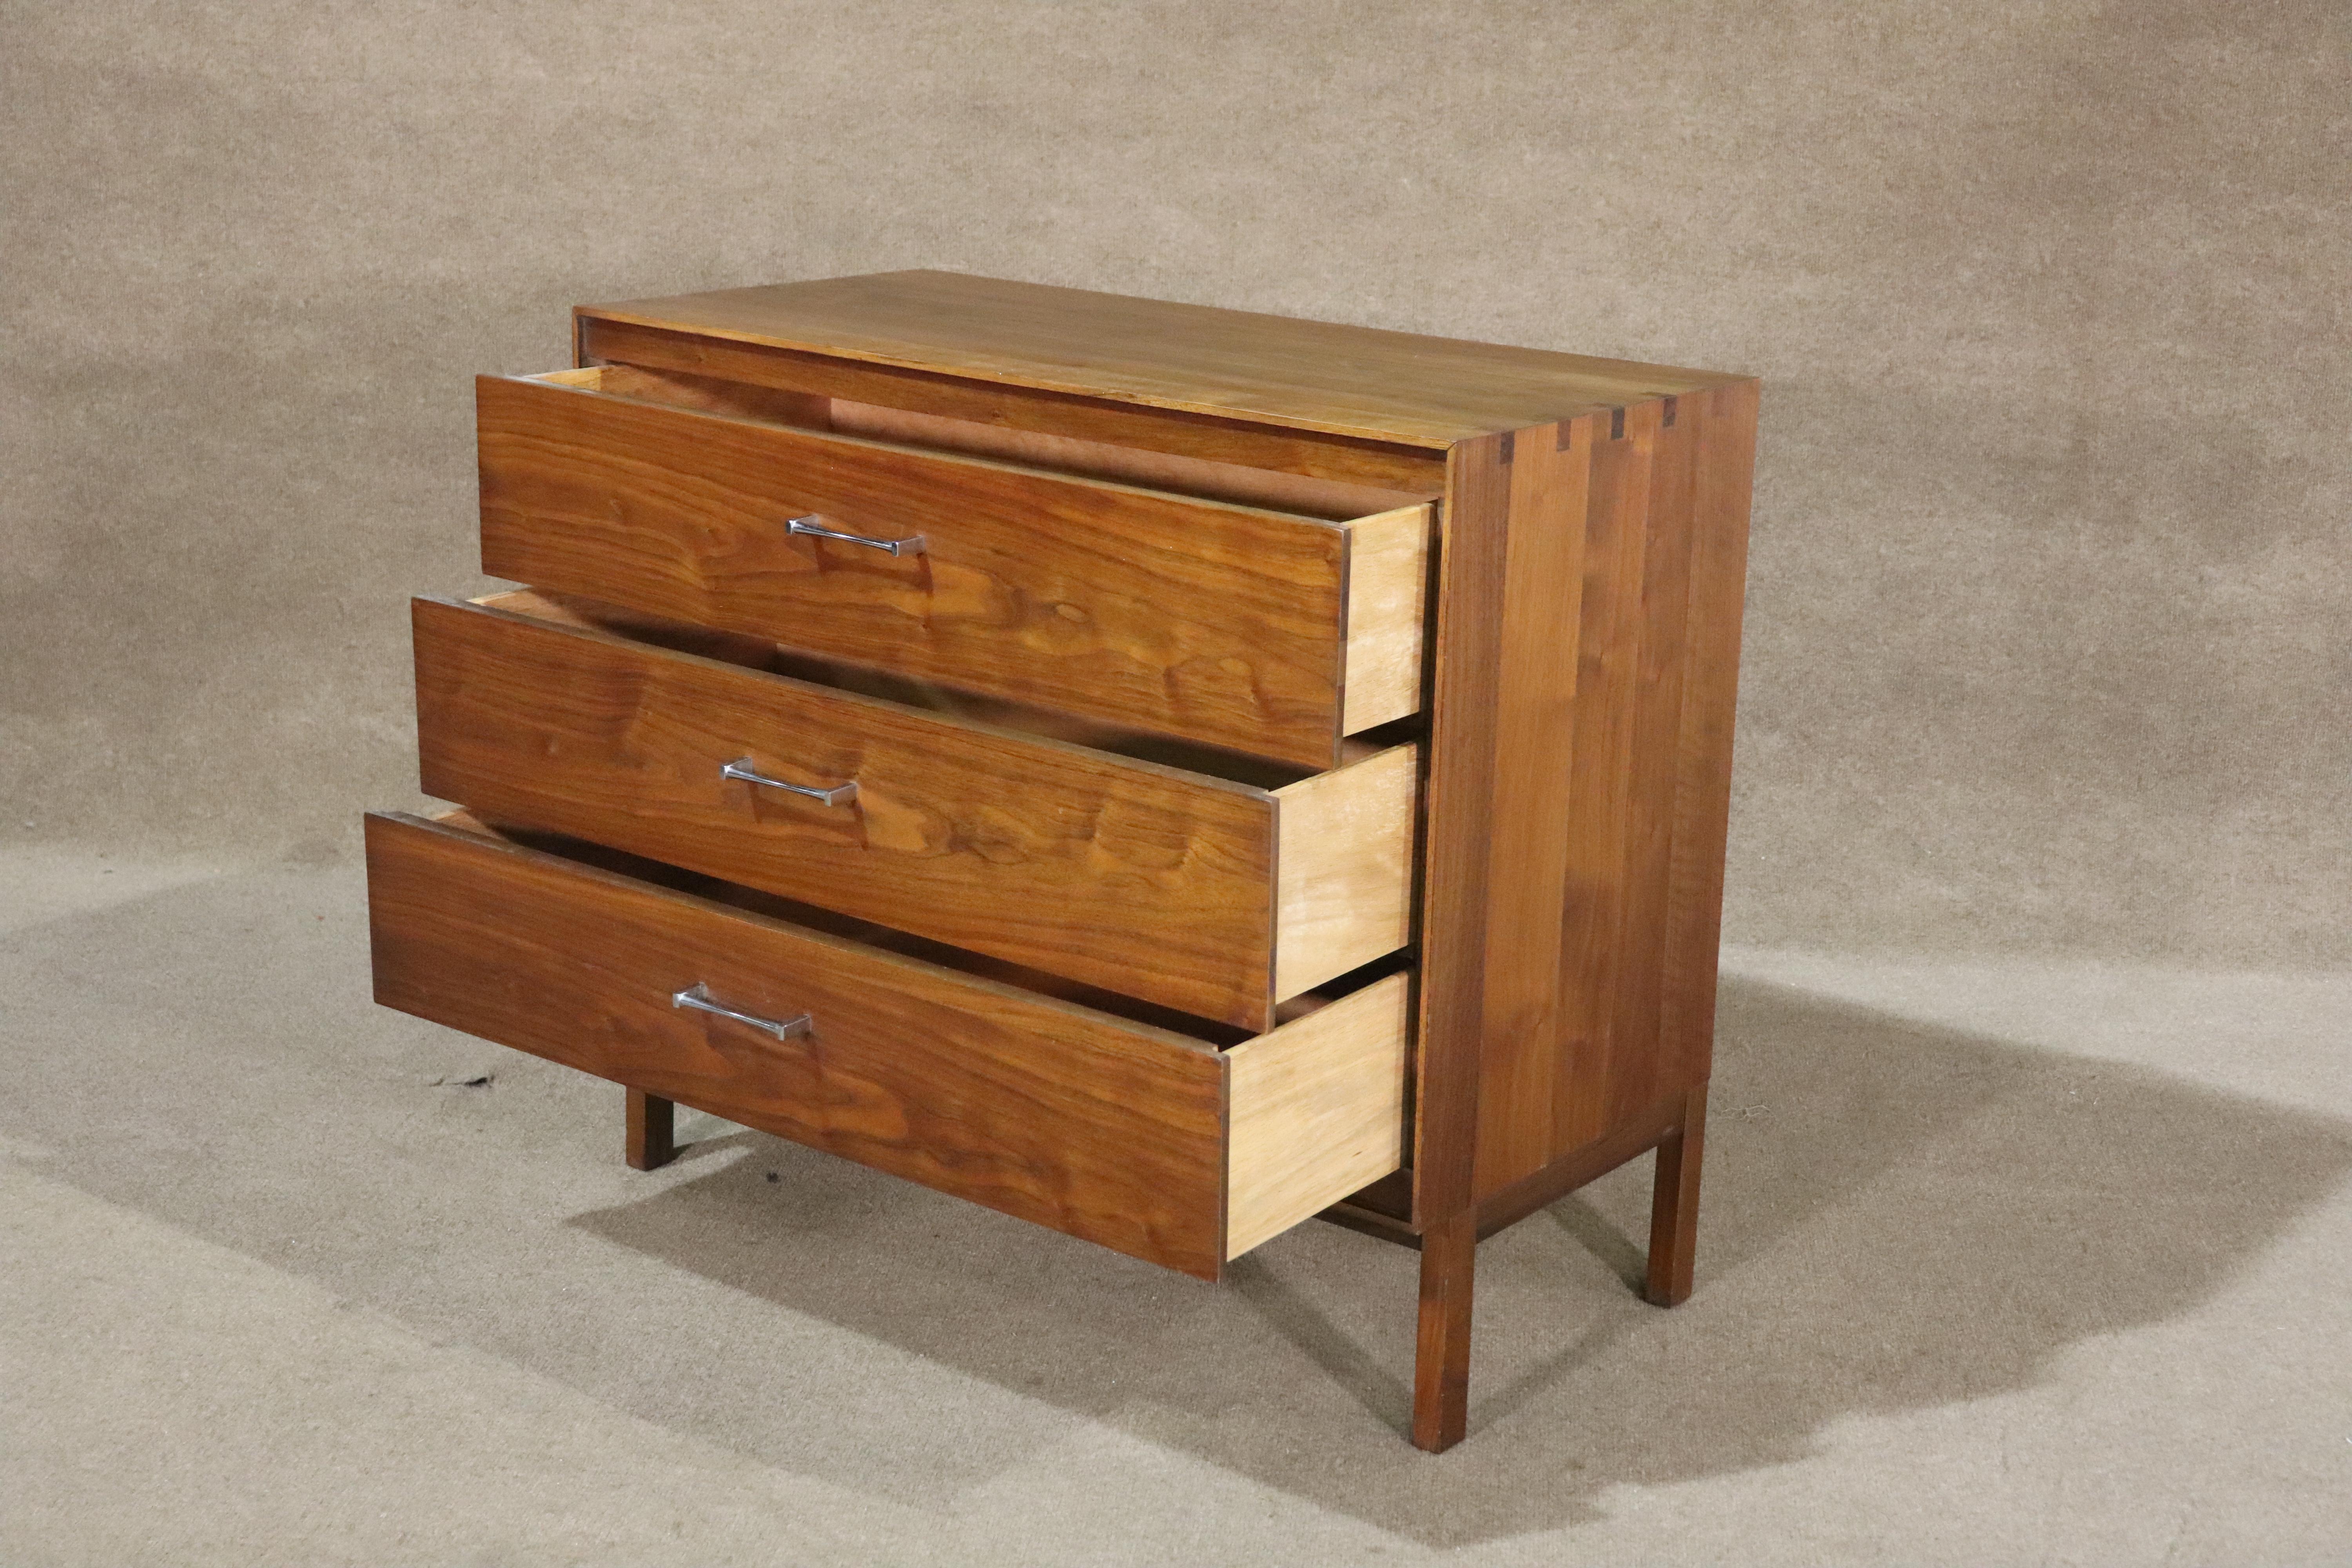 Mid-century modern dresser designed by Paul McCobb for his 'Components' line in conjunction with Lane Furniture. Warm walnut grain with rosewood inlay and polished chrome hardware.
Please confirm location NY or NJ